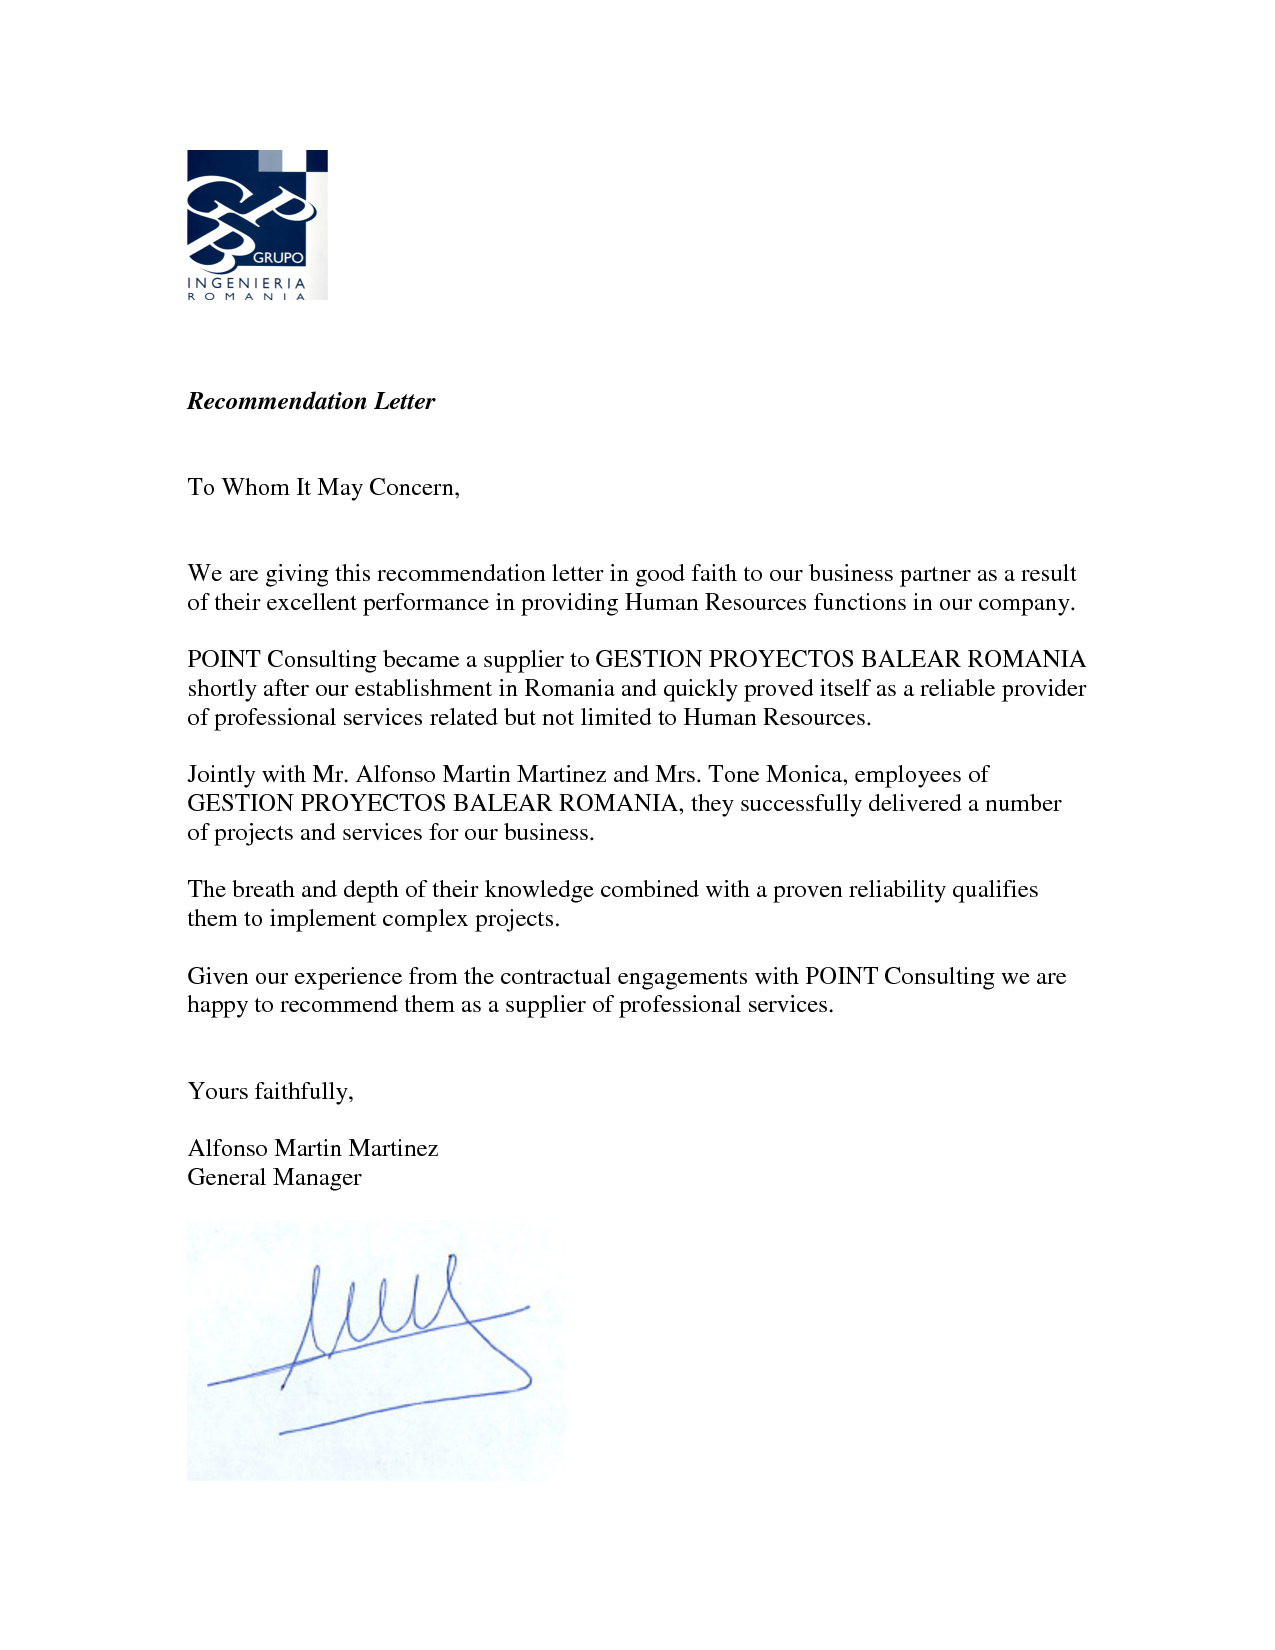 Business Recommendation Letter For A Company Debandje within proportions 1275 X 1650